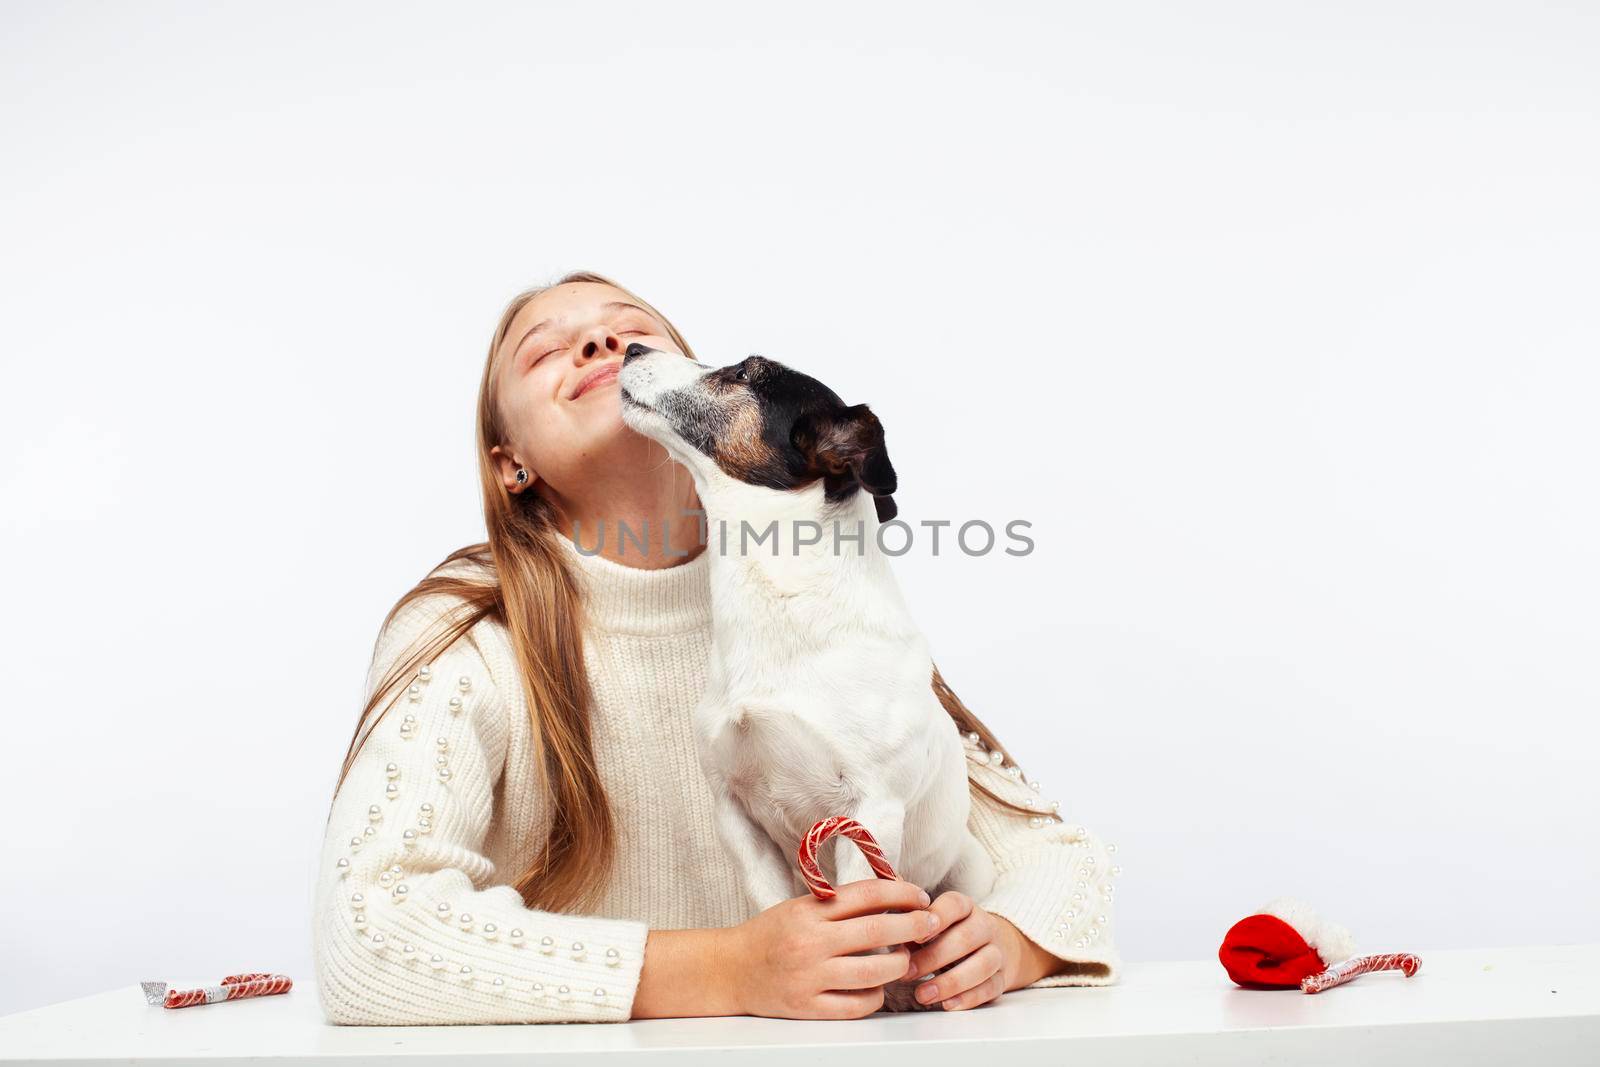 pretty young blond girl with her little cute dog wearing Santas red hat at Christmas holiday isolated on white background, lifestyle people concept close up